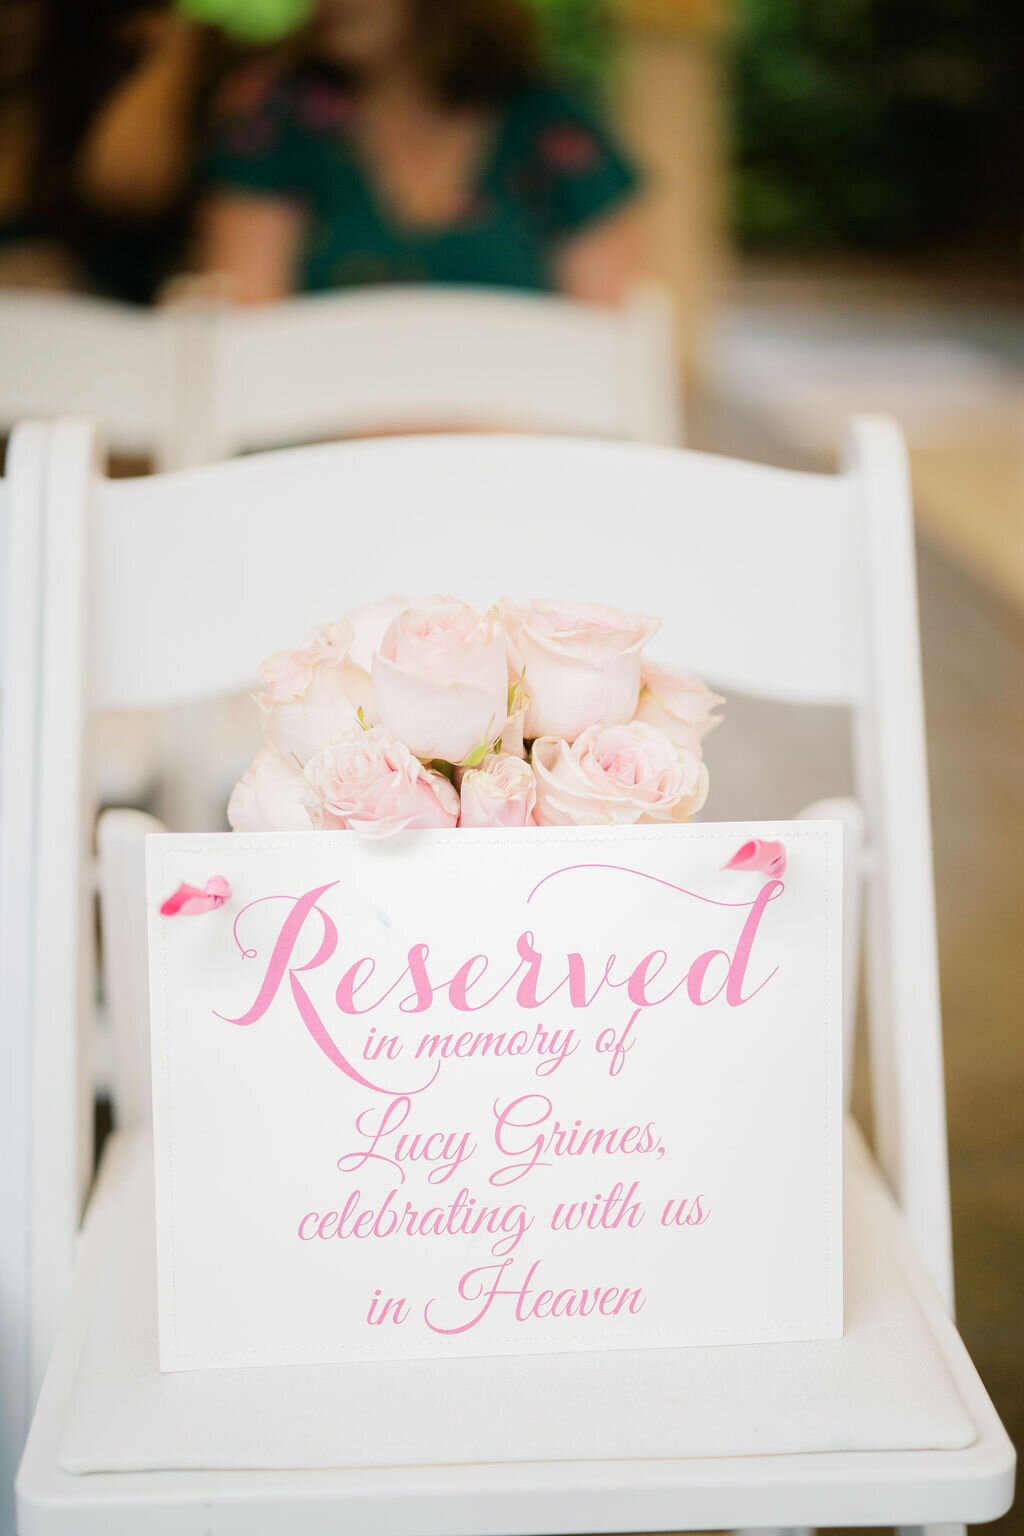 a chair with a reserved in memory of sign